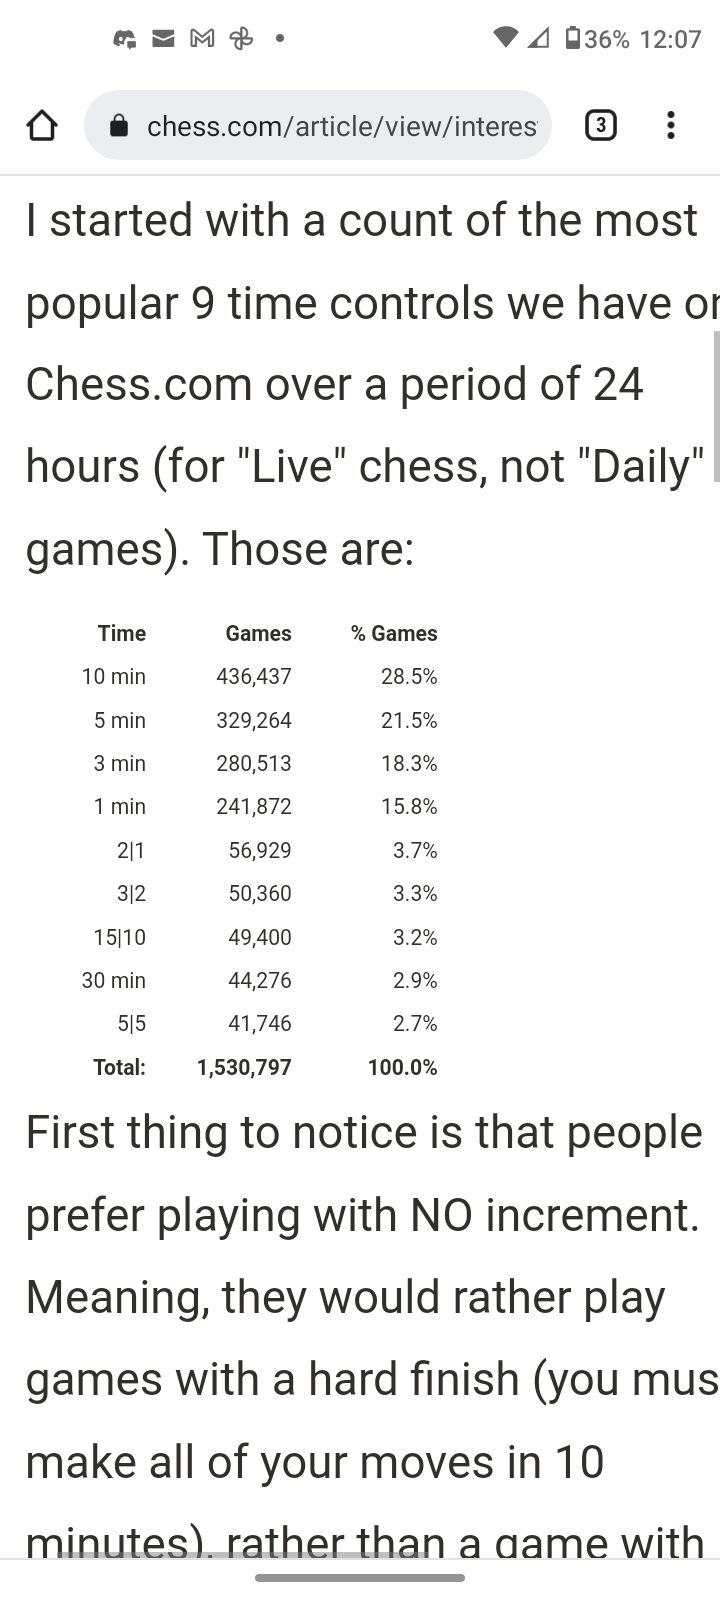 Blitz rating to rapid - Chess Forums 